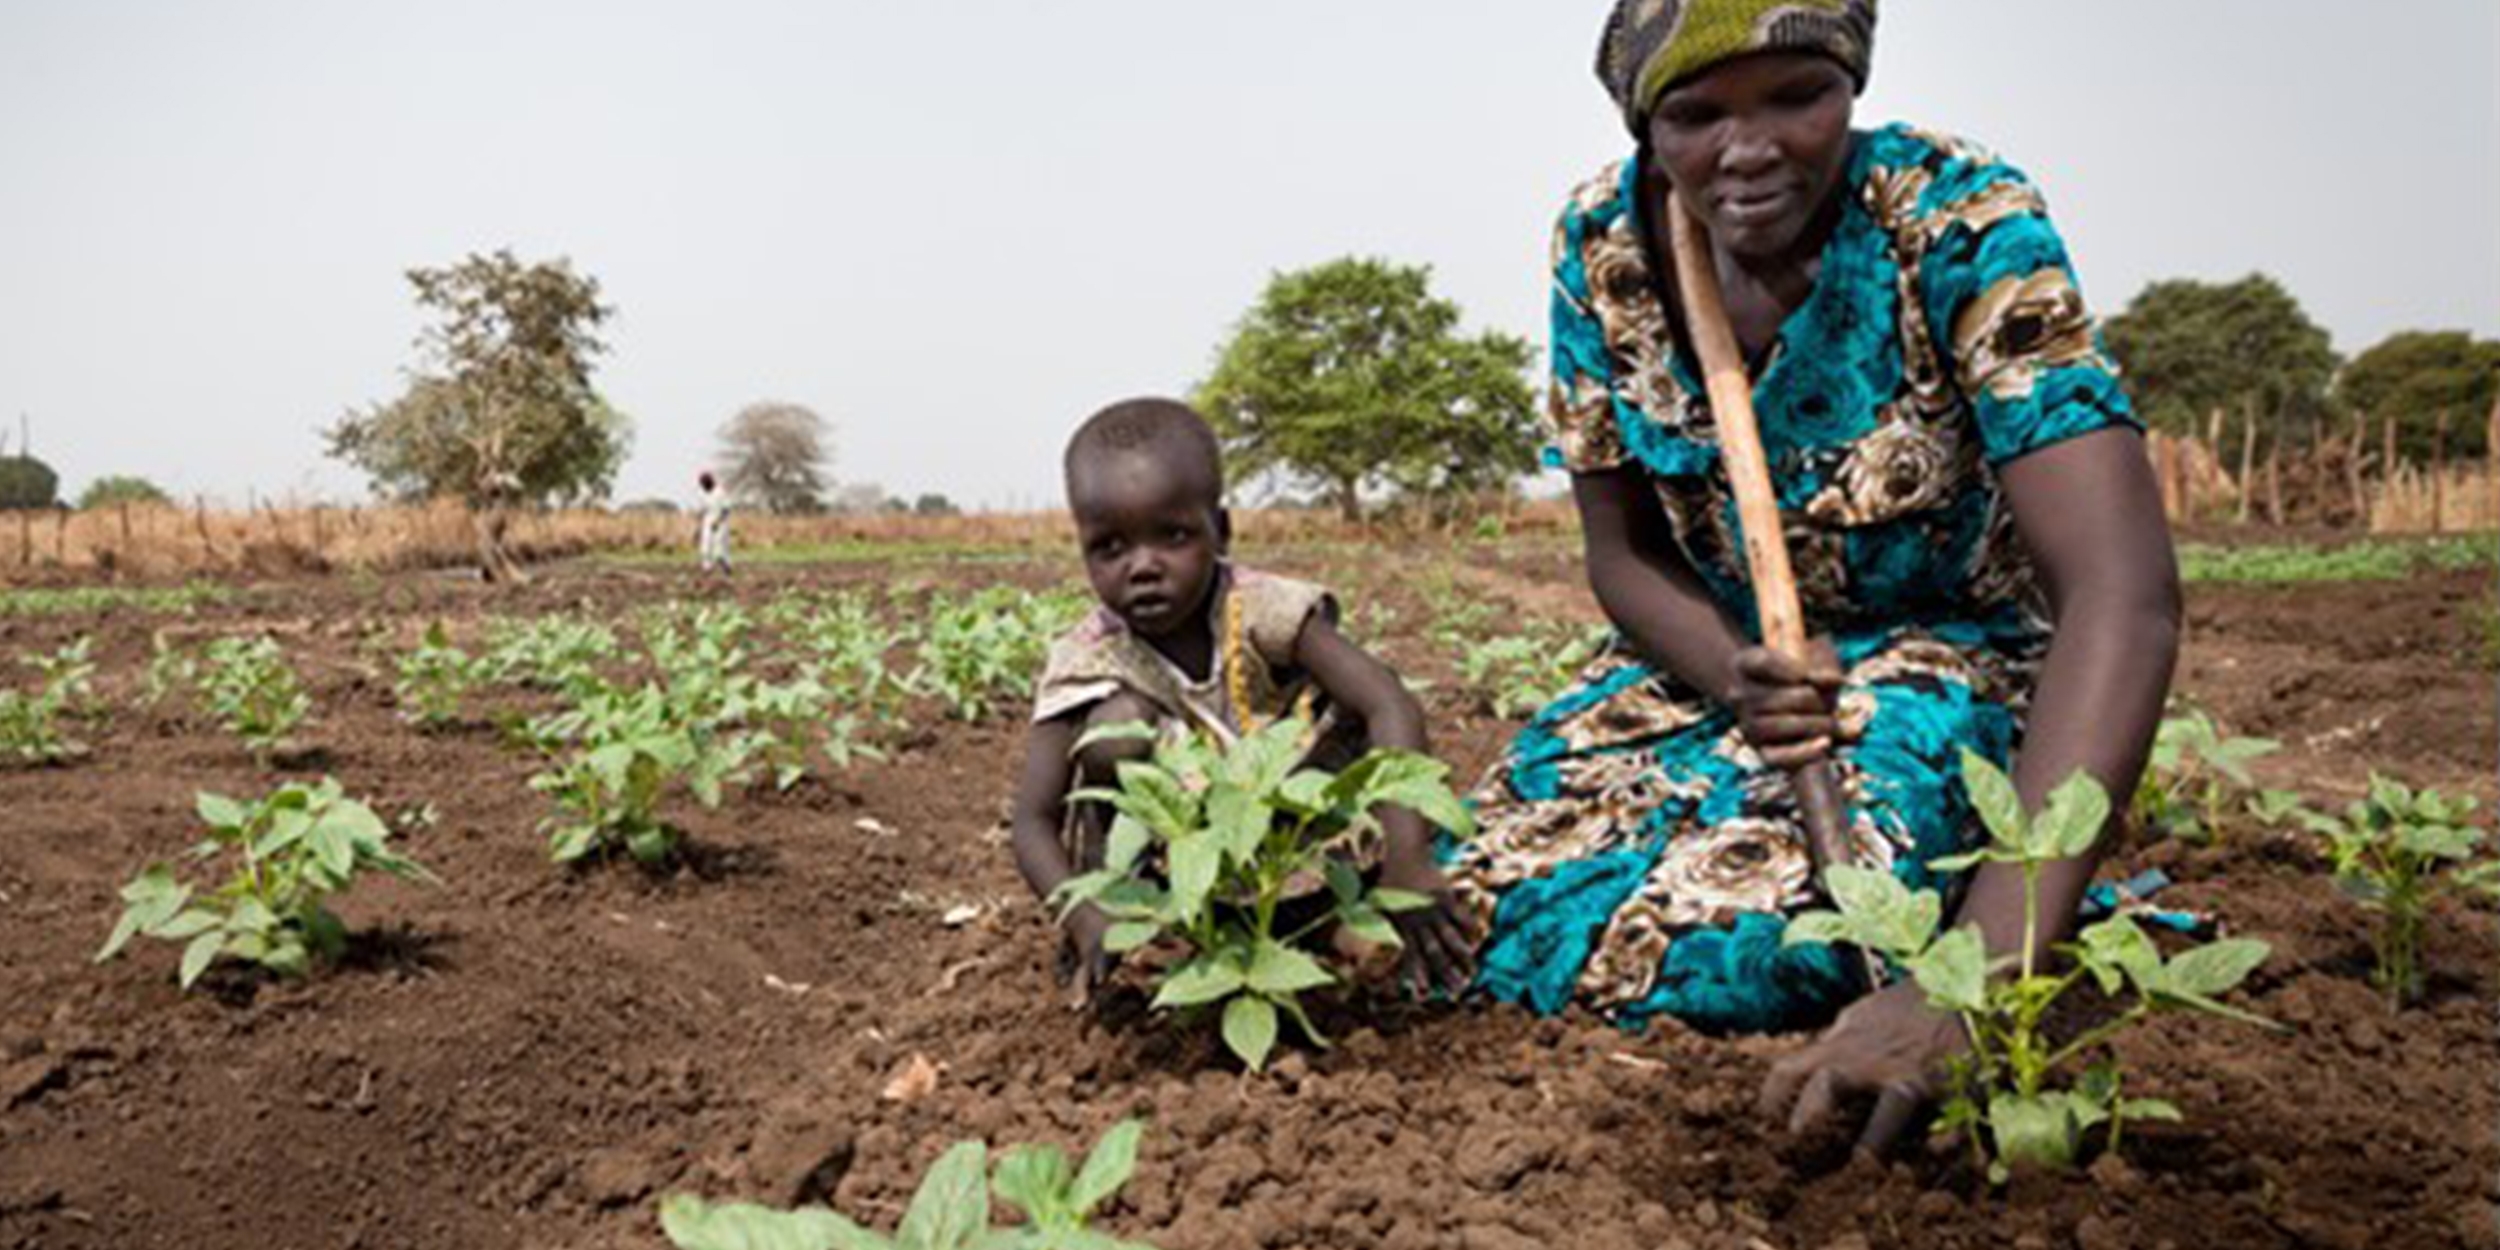 A mother and her child plant crops in a field